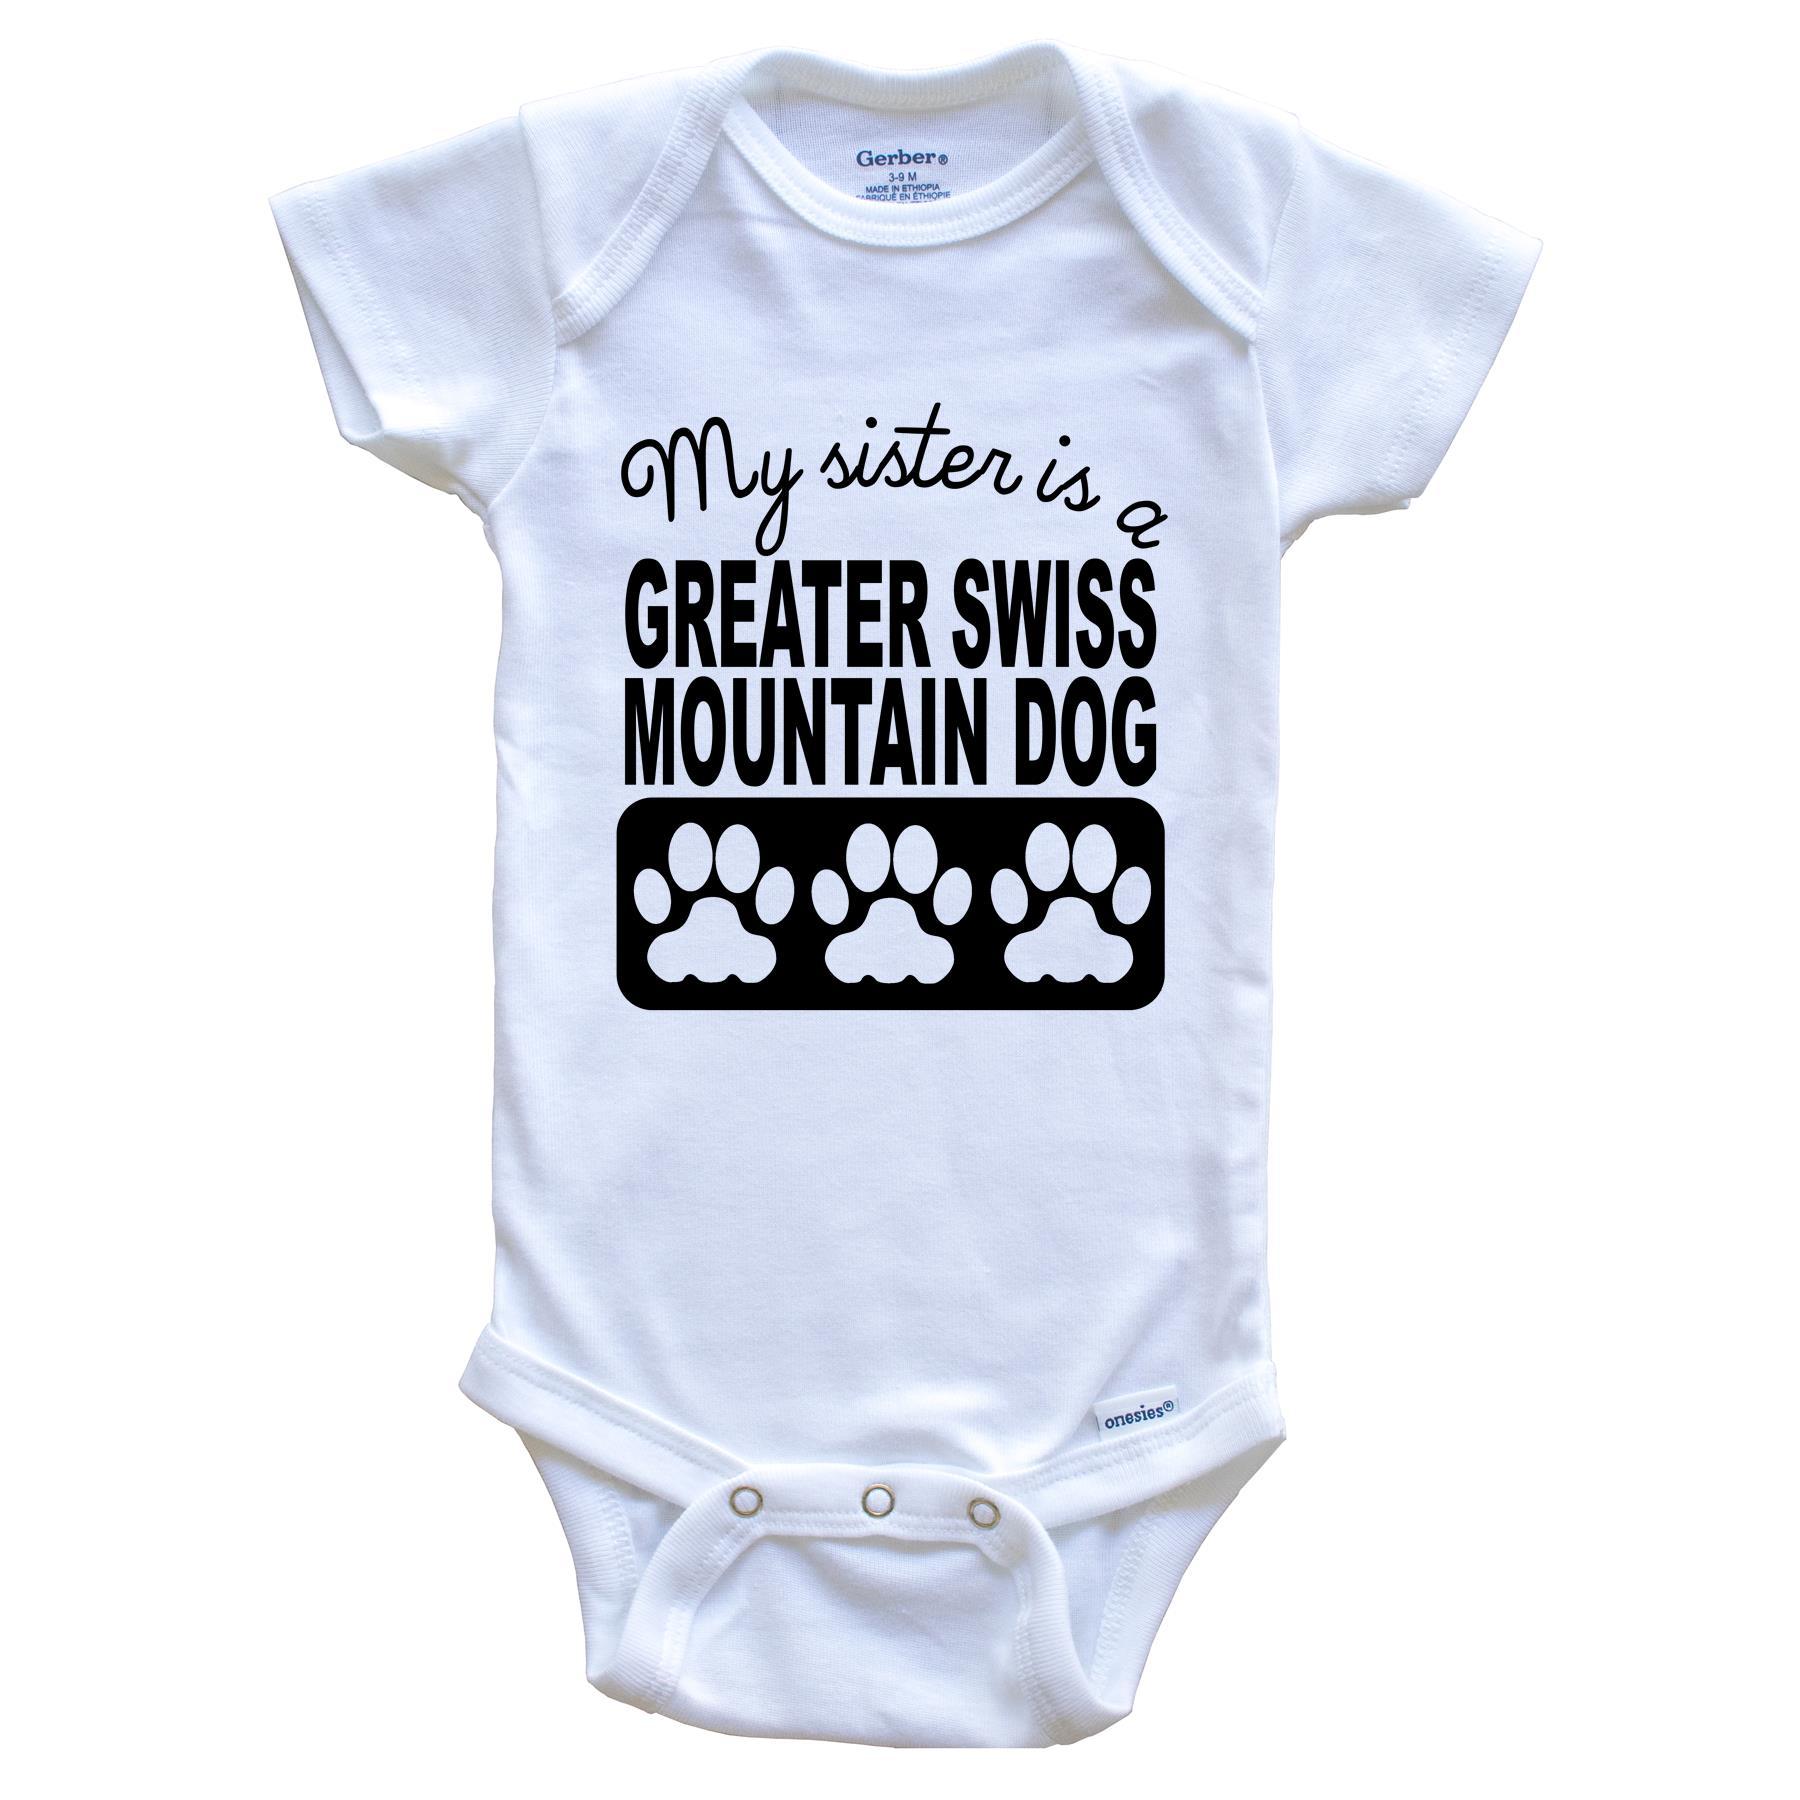 My Sister Is A Greater Swiss Mountain Dog Baby Onesie